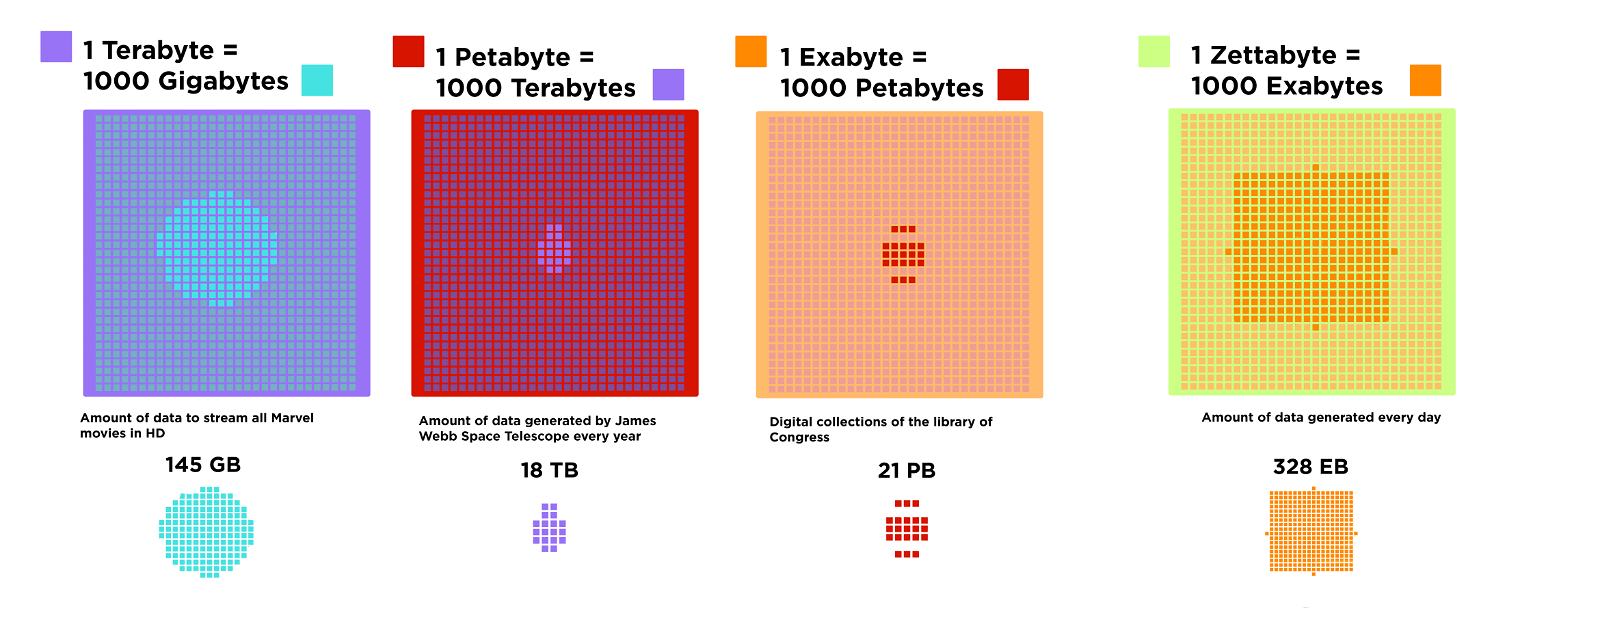 Four squares of different colors are in a line. Each square is made of 1000 small squares. At the center of each large square, some small squares are a different color. The leftmost large square is purple, with the title “1 Terabyte = 1000 Gigabytes.” At the center of that square are 145 light blue small squares, with the legend “Amount of data to stream all Marvel movies in HD = 145 GB.” The next square is red, with the title “1 Petabyte = 1000 Terabytes.” At the center of that square are 18 purple small squares, with the legend “Amount of data generated by the James Webb Space Telescope every year = 18 TB.” The next square is orange, with the title “1 Exabyte = 1000 Petabytes.” At the center of that square are 21 red small squares, with the legend “Digital collections of the Library of Congress = 21 PB.” The rightmost square is green, with the title “1 Zettabyte = 1000 Exabytes.” At the center of that square are 328 orange small squares, with the legend “Amount of data generated every day = 328 EB.”